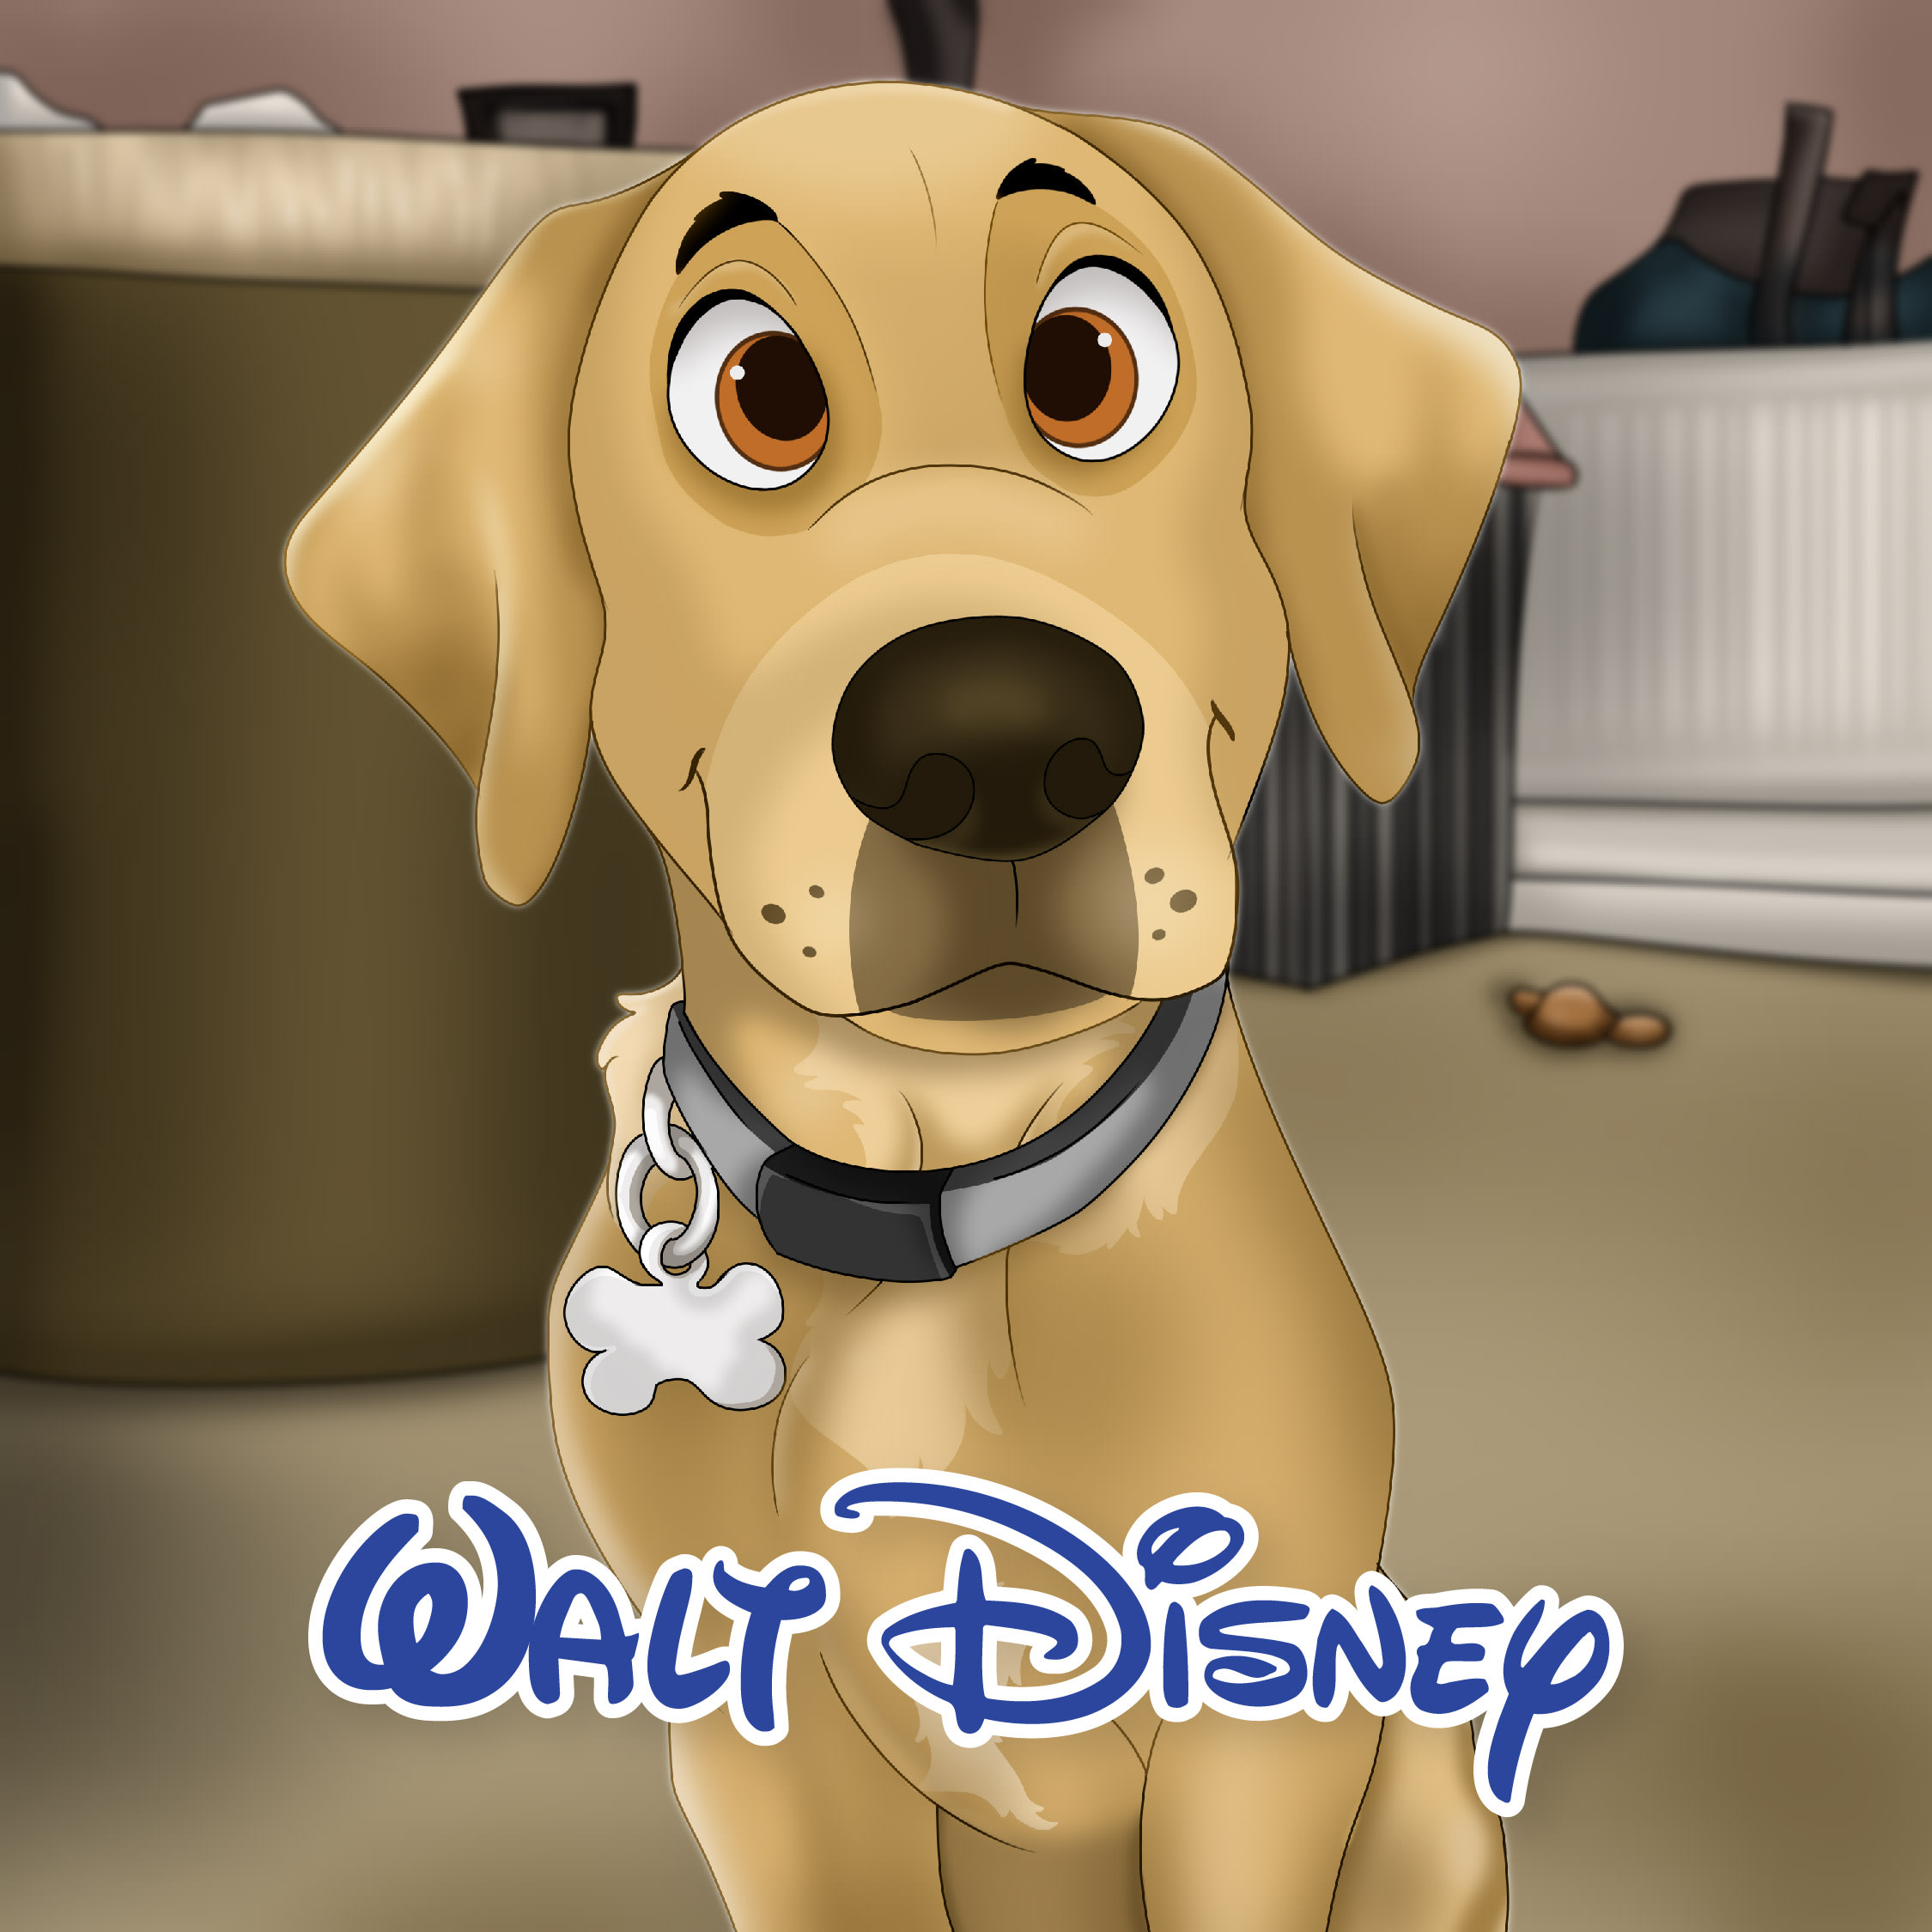 Draw your pets into disney cartoon style by Rowdesgn | Fiverr